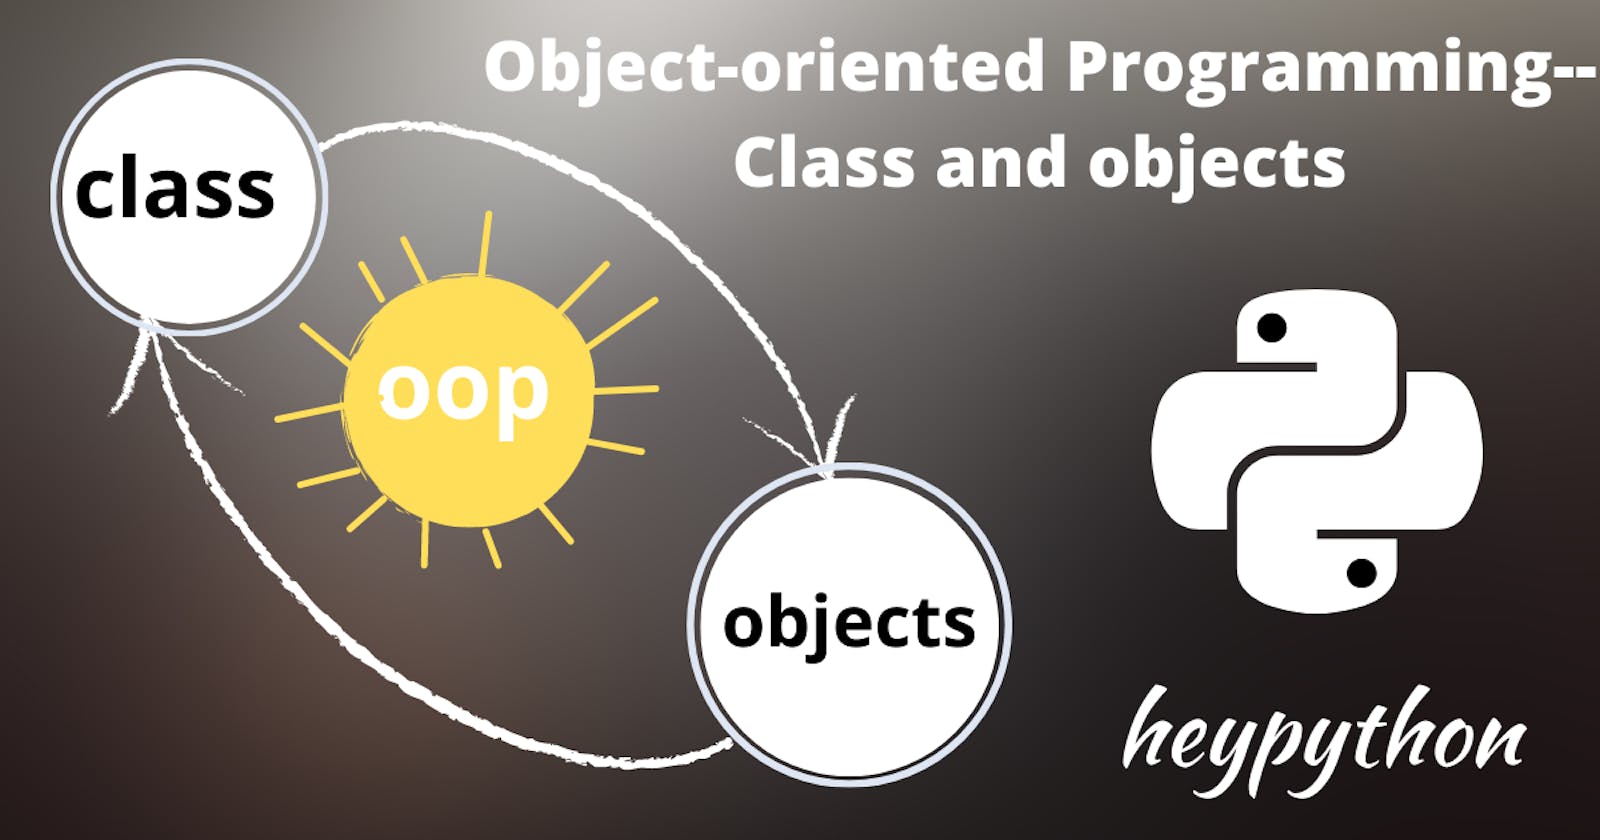 What is a Python class and objects in Object-oriented programming?